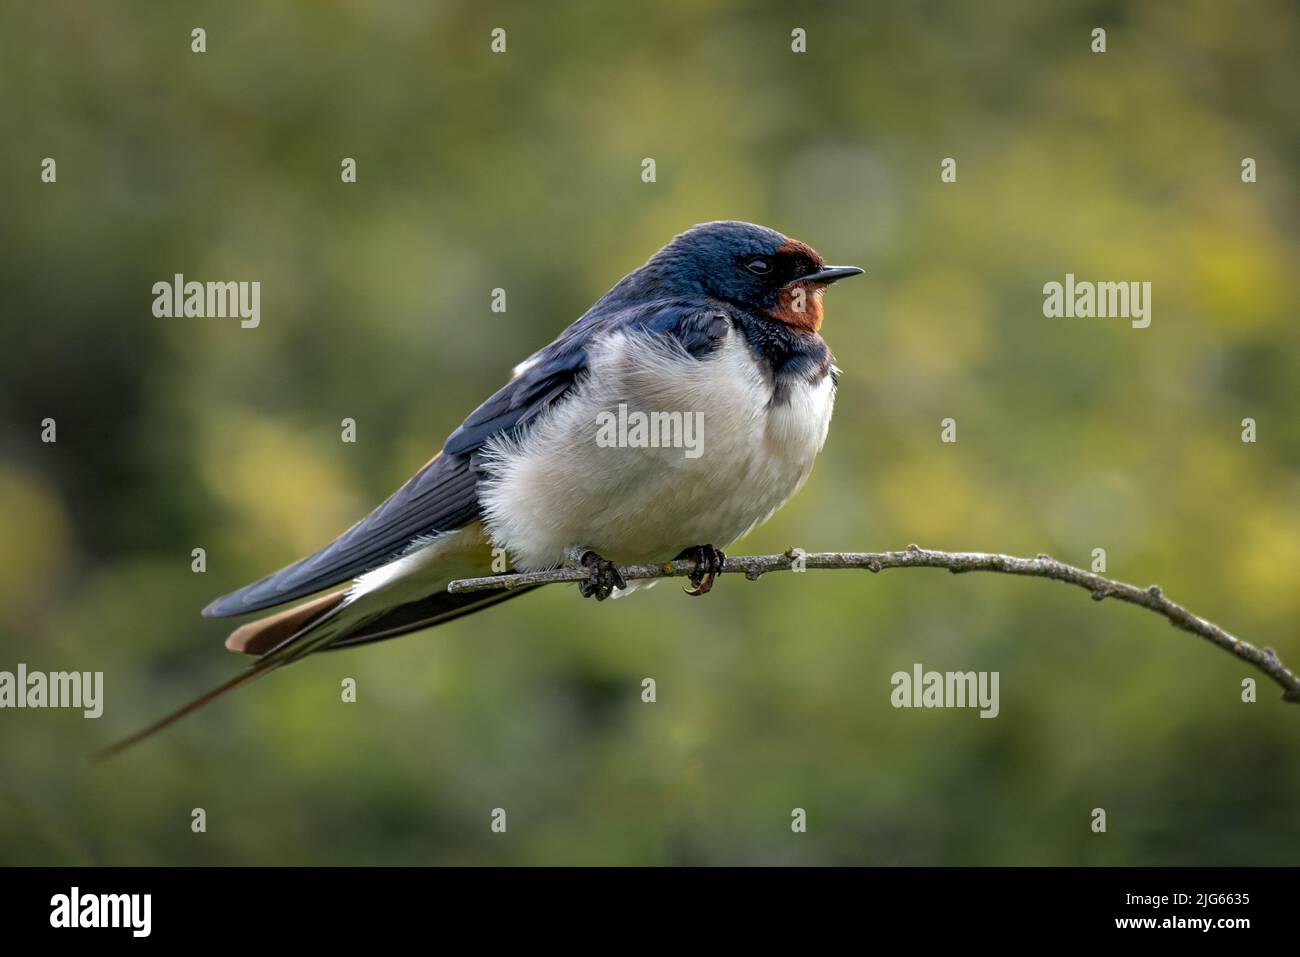 A swallow, Hirundo rustica, is perched on a branch. It is taken with an out of focus natural background. Stock Photo